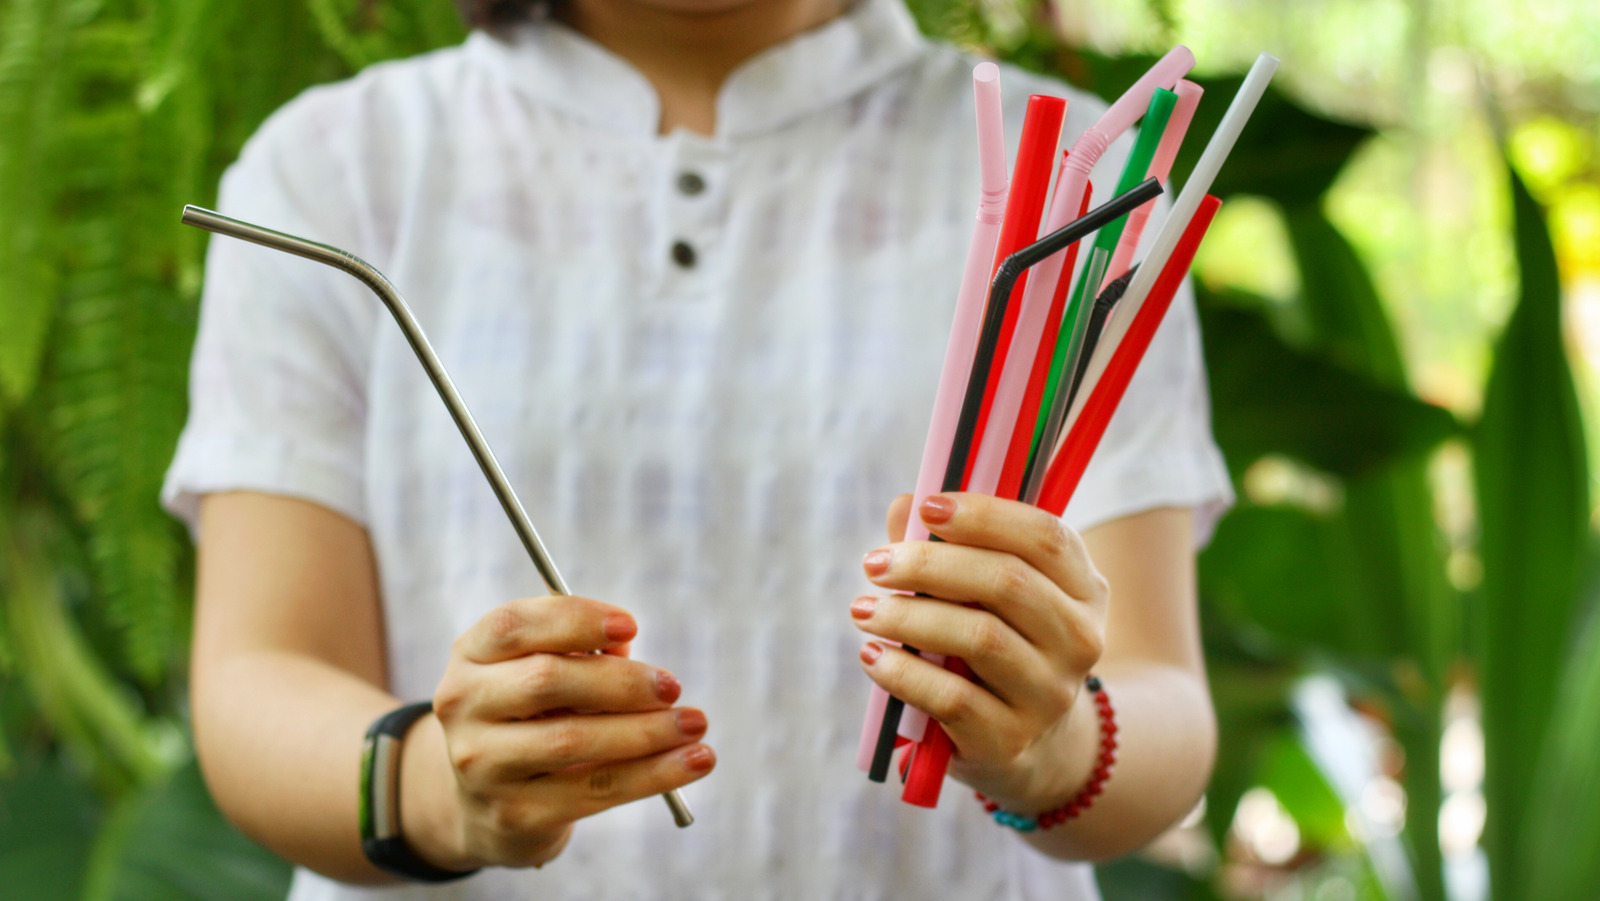 Straw Cleaner for Stainless Steel, Glass, and Plastic Straws Thin